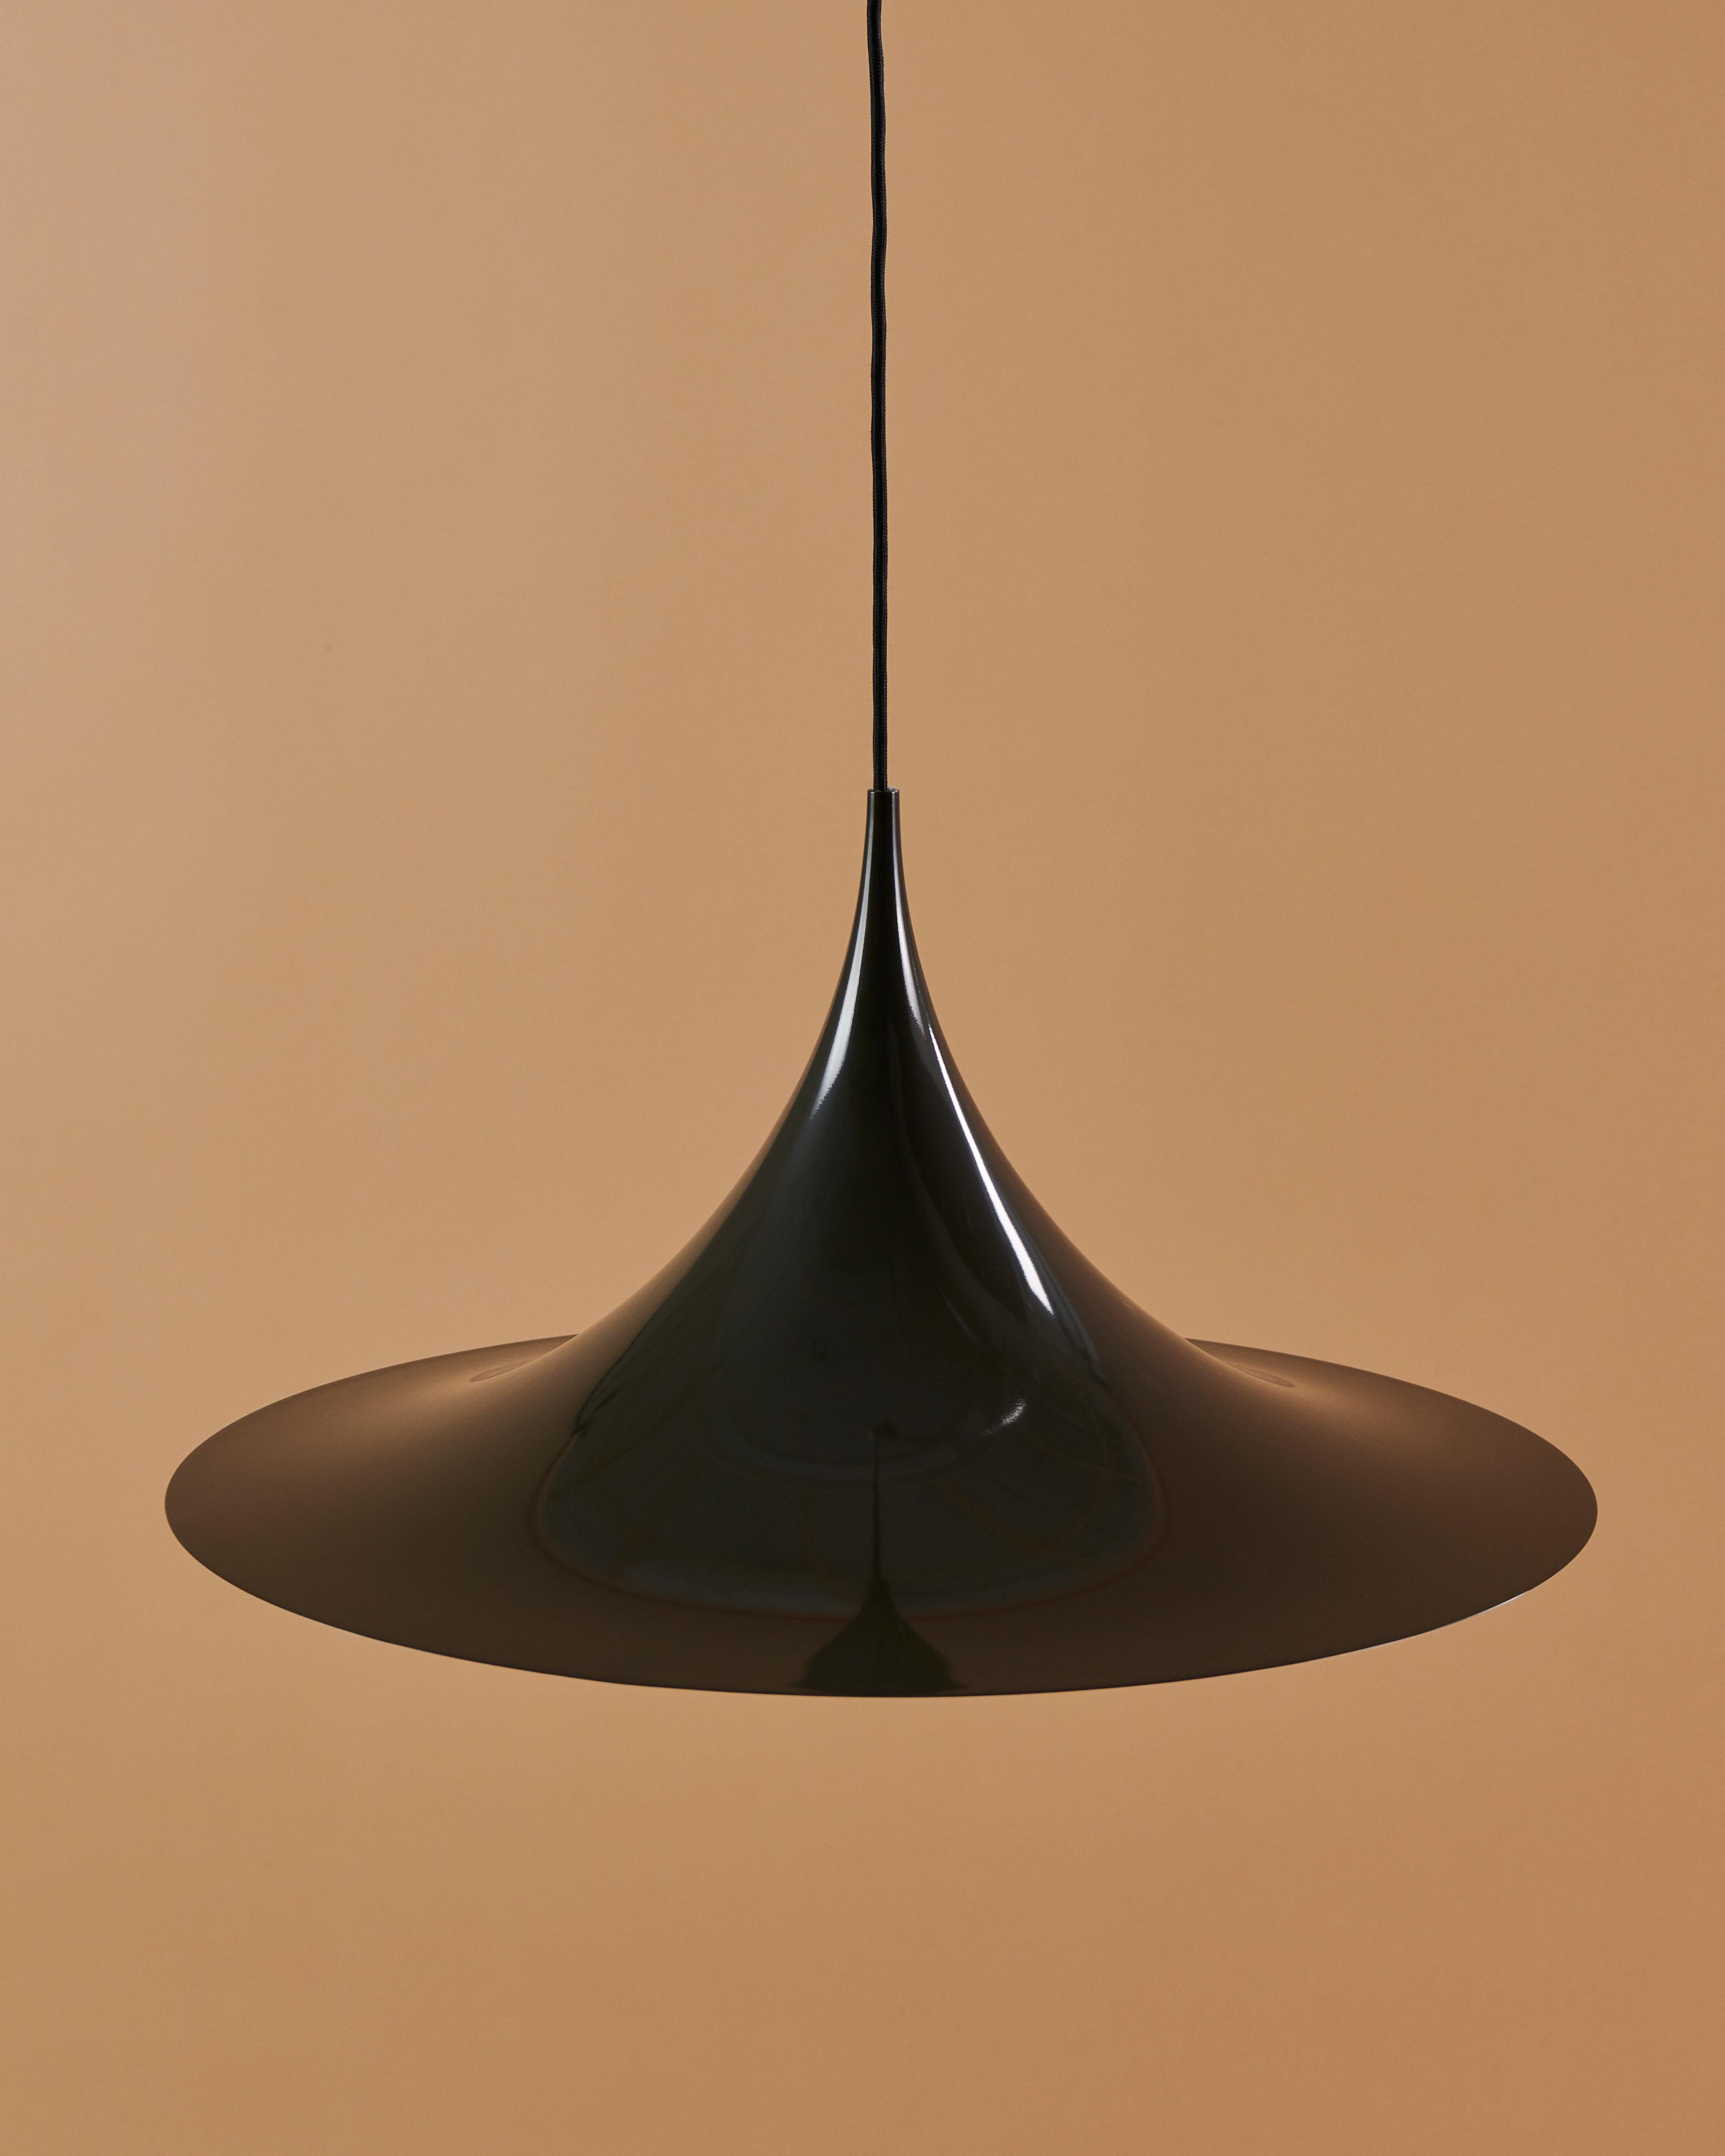 Bonderup & Thorup 'Semi' Pendant in Fennel Seed For Sale 2